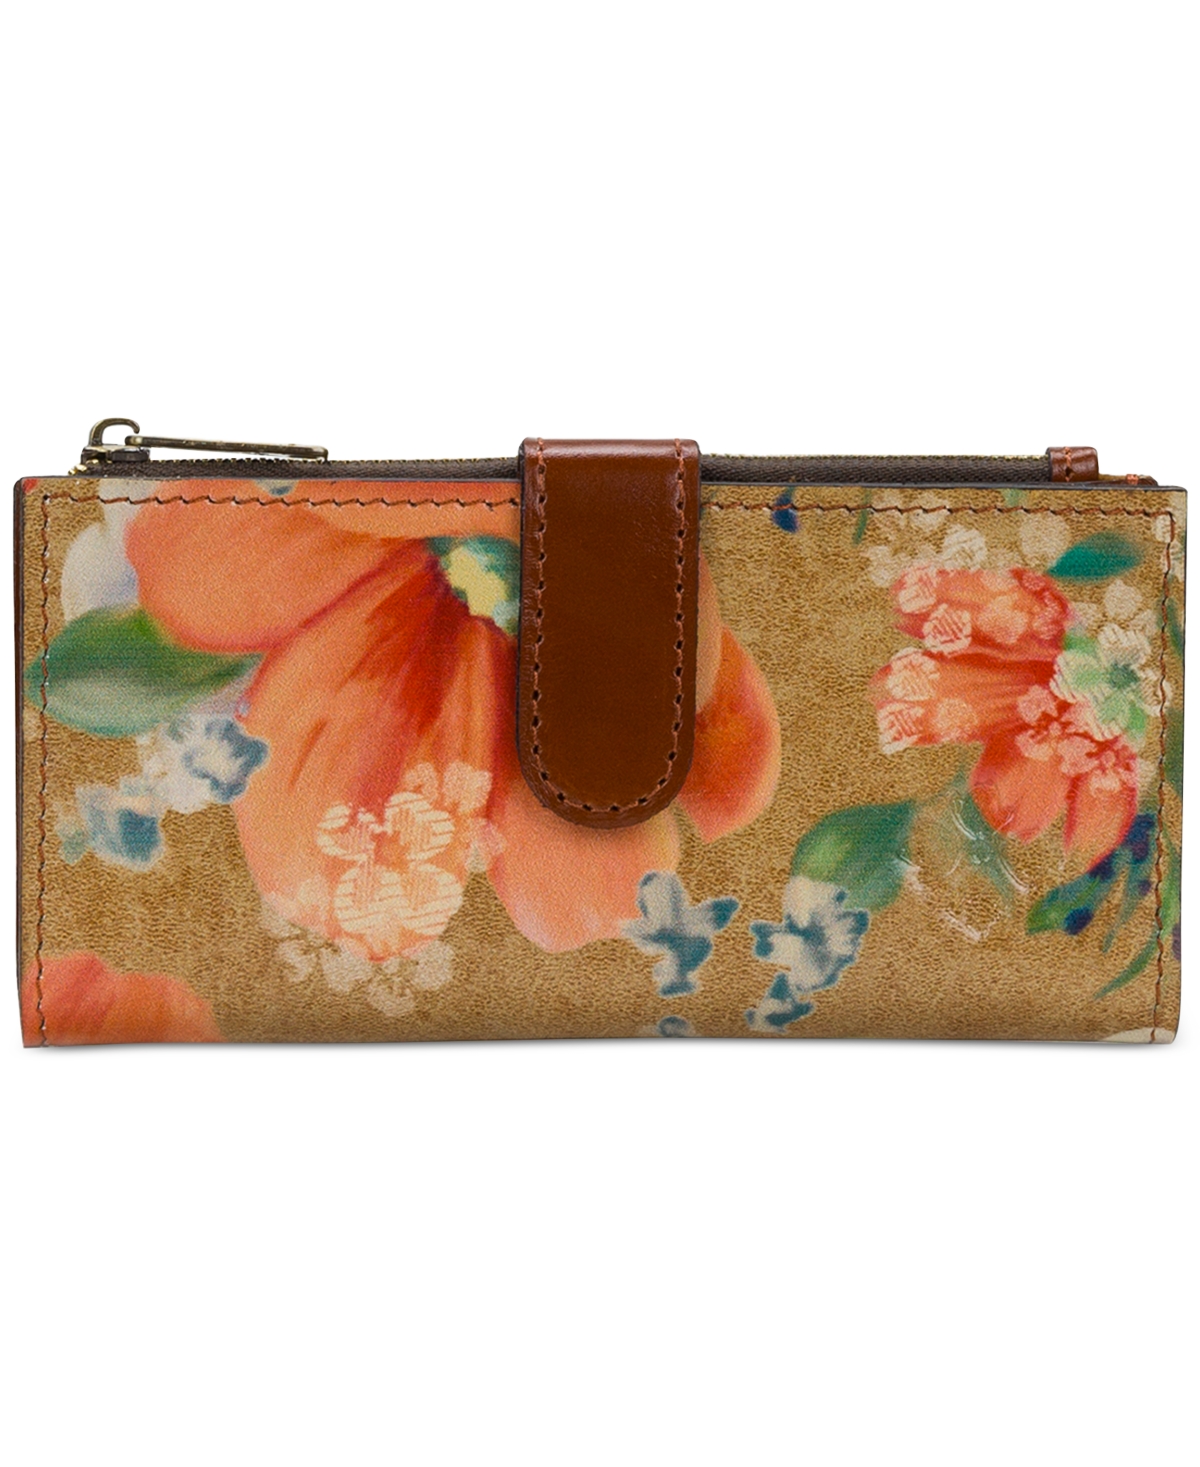 Patricia Nash Nazari Leather Wallet In Apricot Blossoms